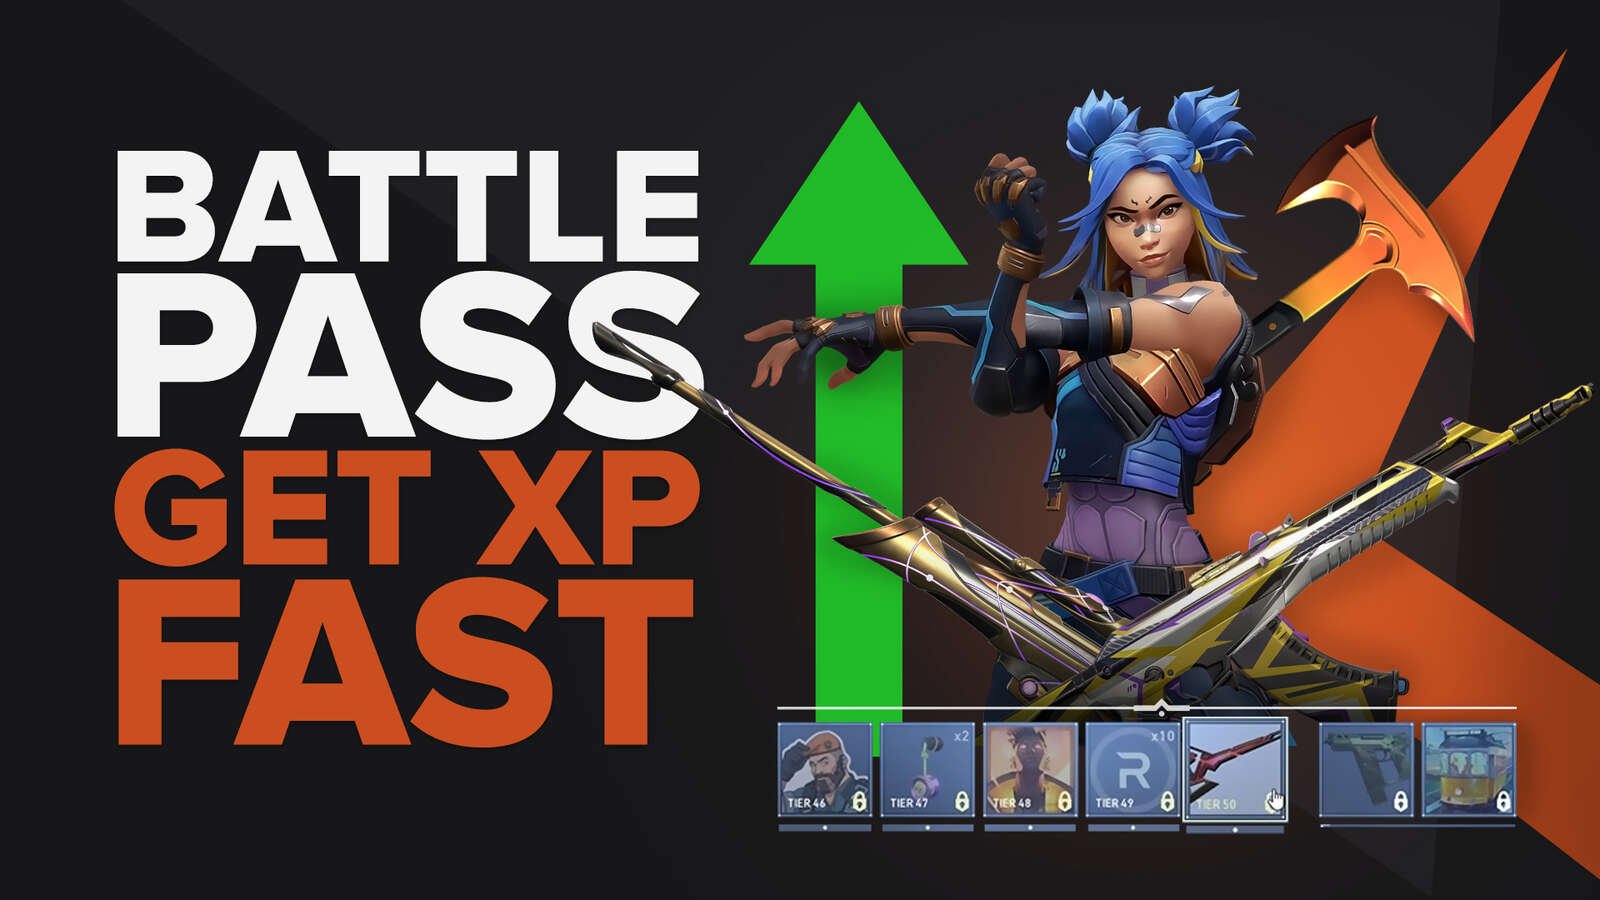 How to get more XP Fast for the Valorant Battle Pass